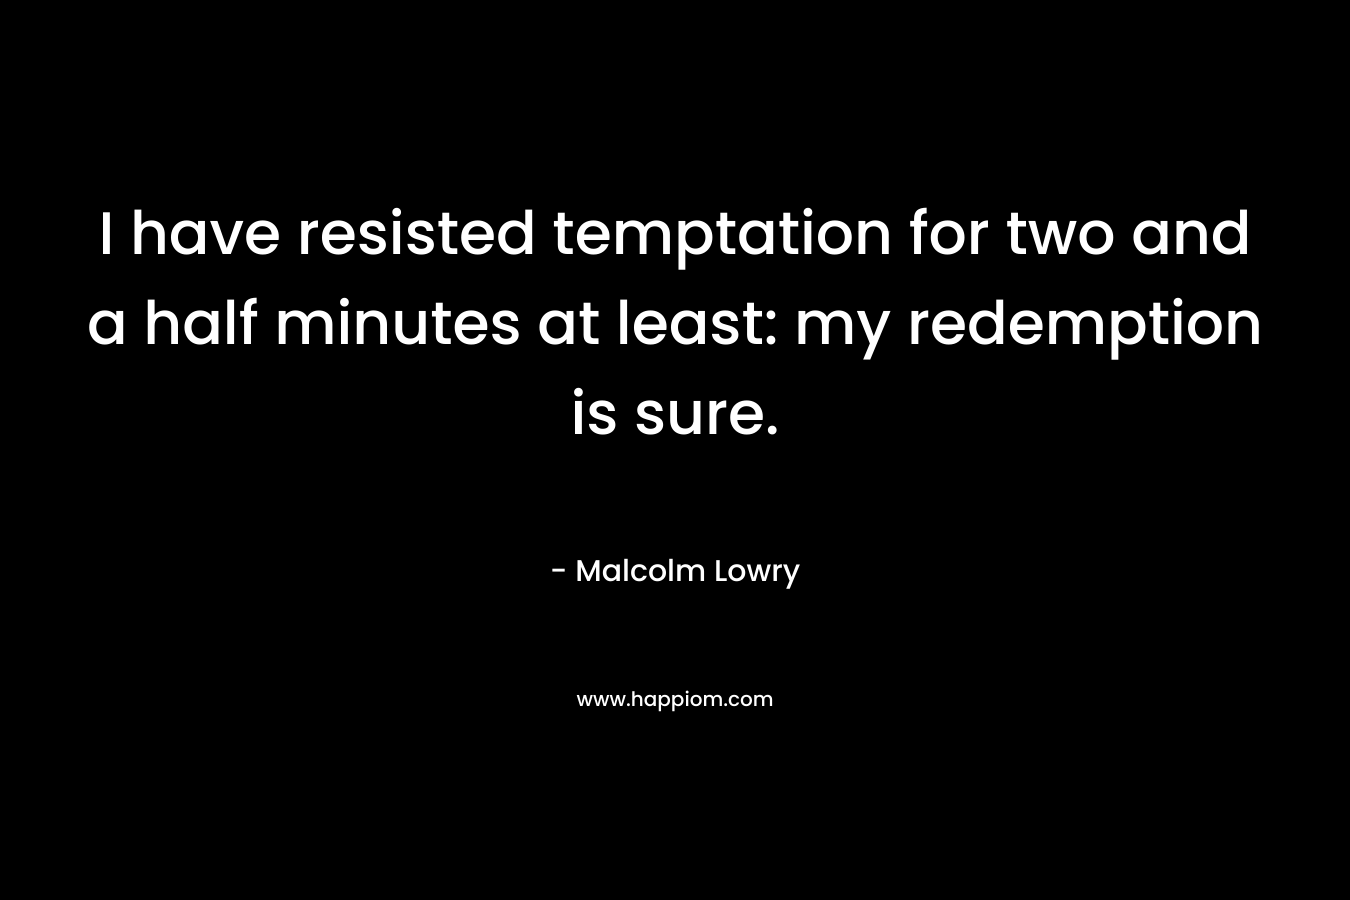 I have resisted temptation for two and a half minutes at least: my redemption is sure. – Malcolm Lowry